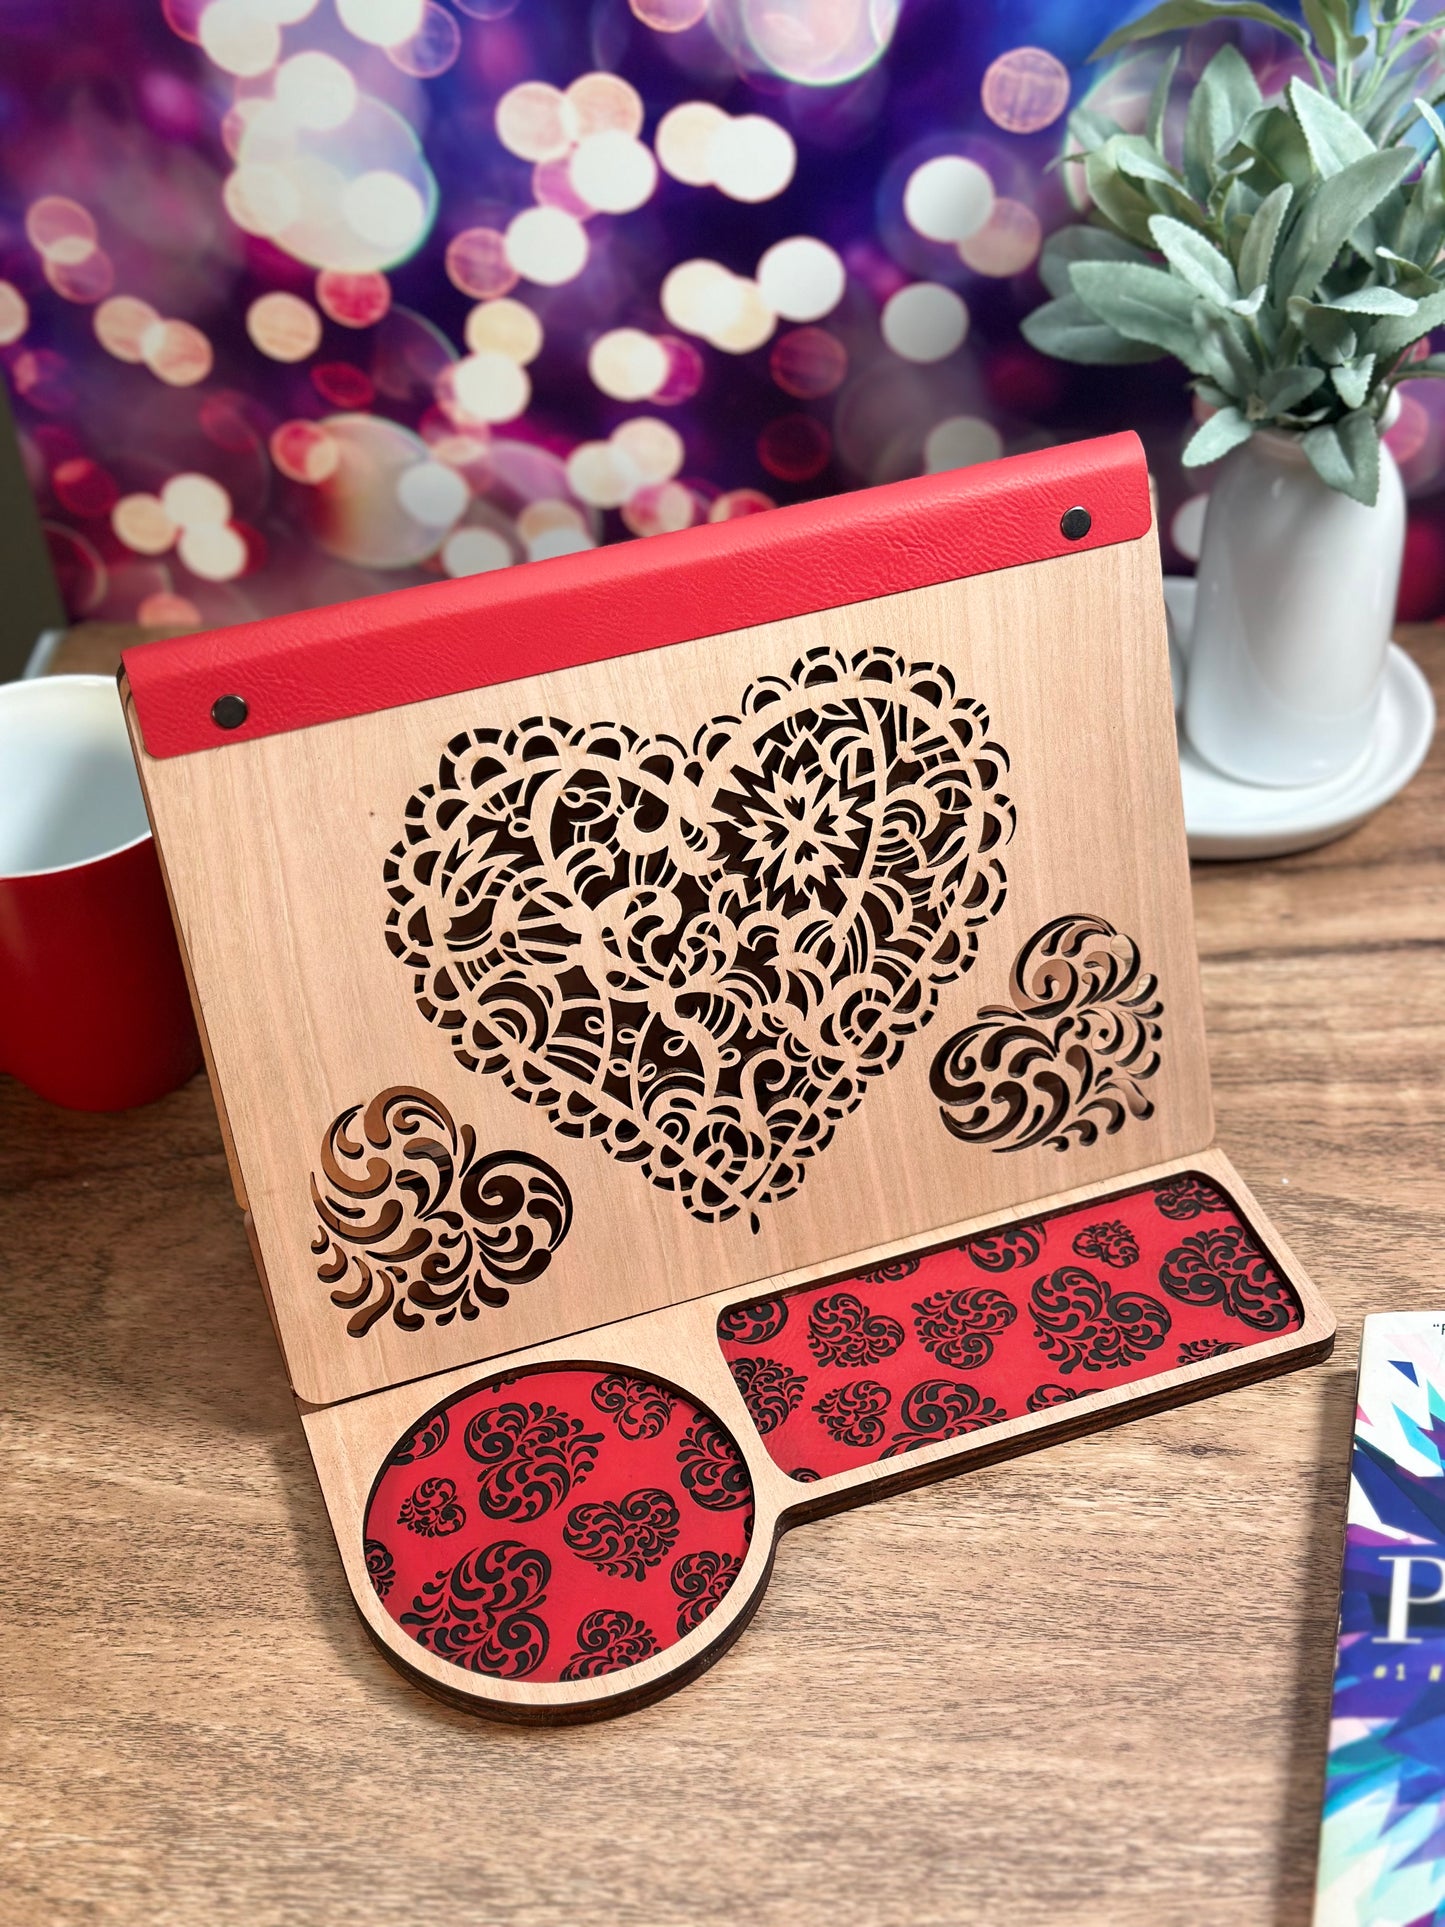 Book Rest and Page Holder - Valentine’s Edition Wooden Book Valet